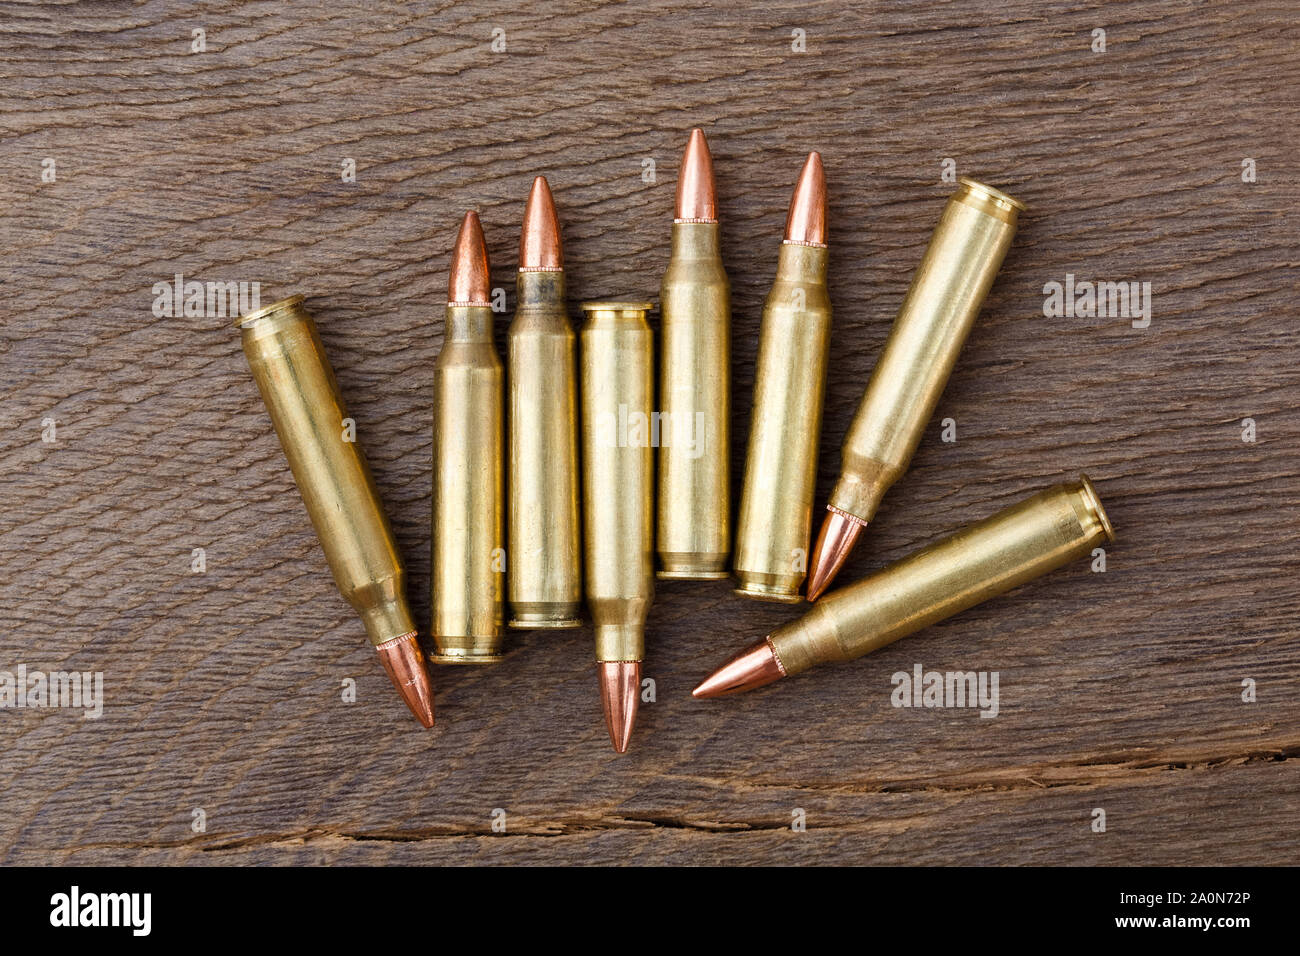 Bullets on rustic wooden background close up. Stock Photo